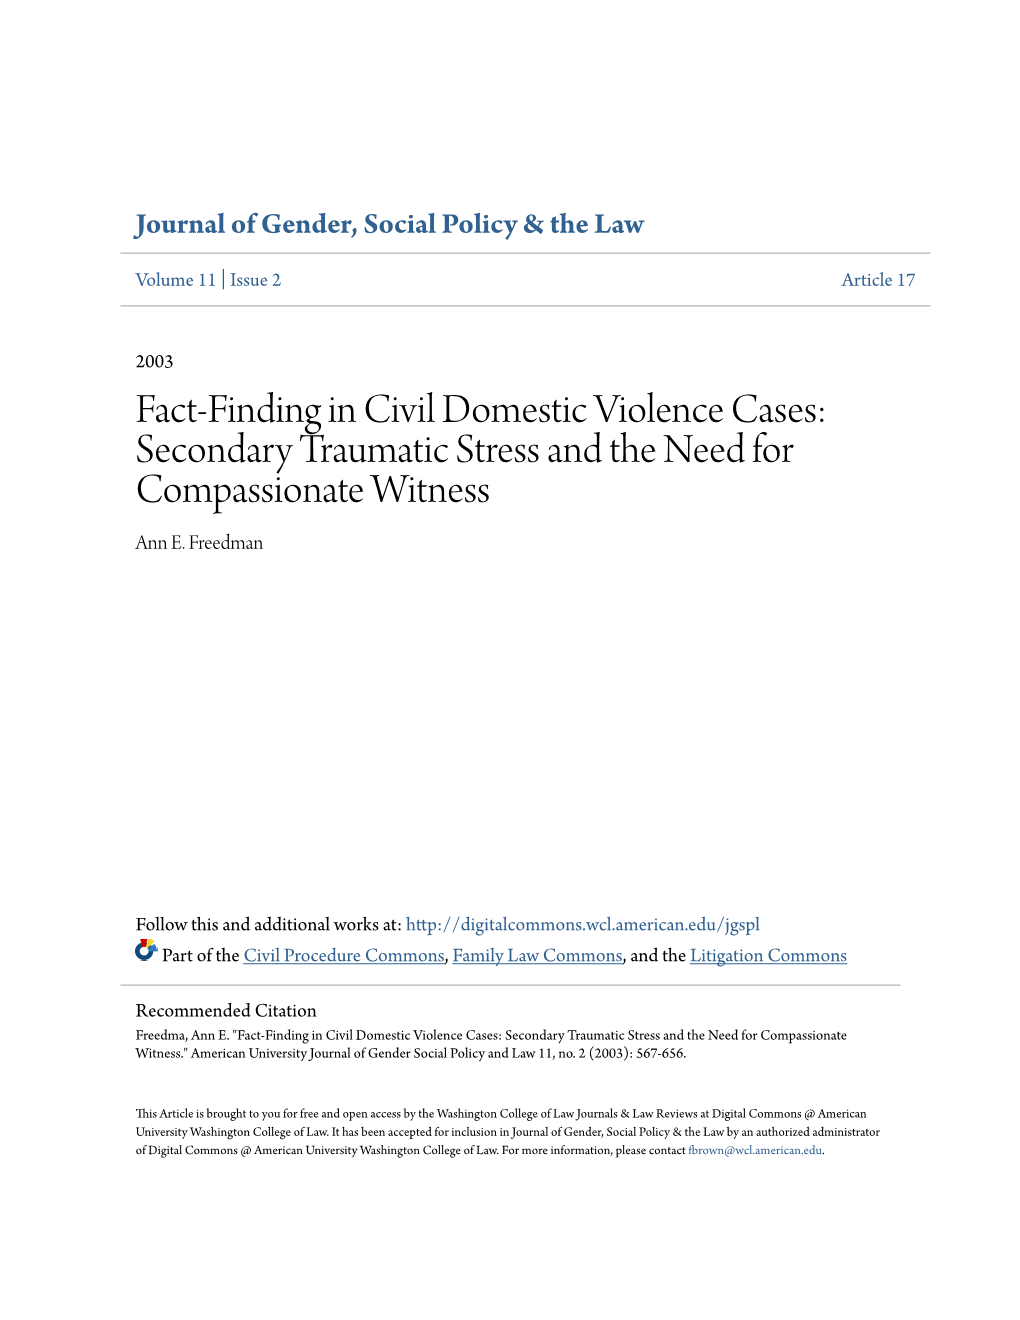 Fact-Finding in Civil Domestic Violence Cases: Secondary Traumatic Stress and the Need for Compassionate Witness Ann E